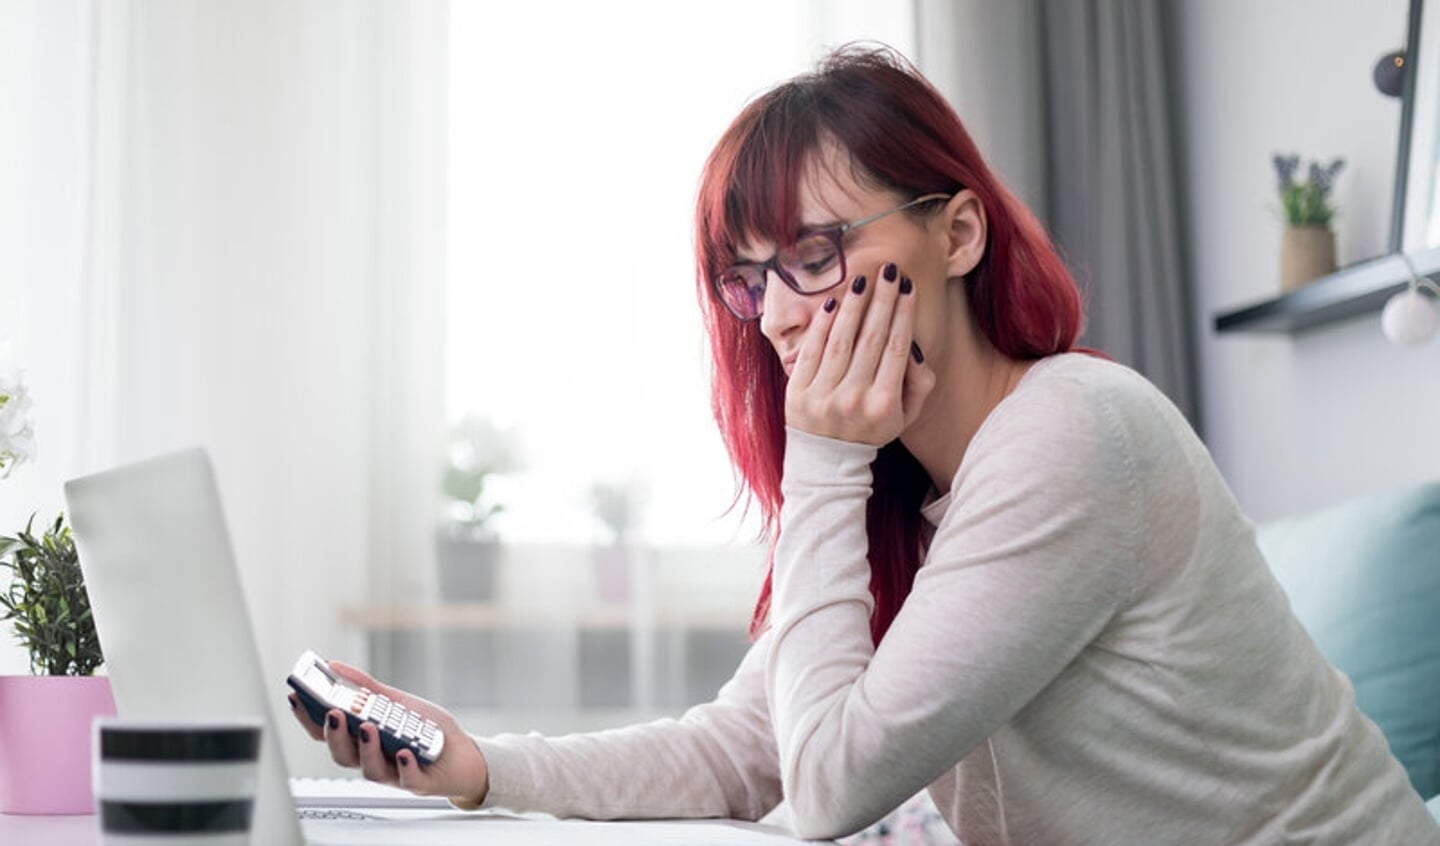 Worried woman at home checking financial documents using calculator and laptop